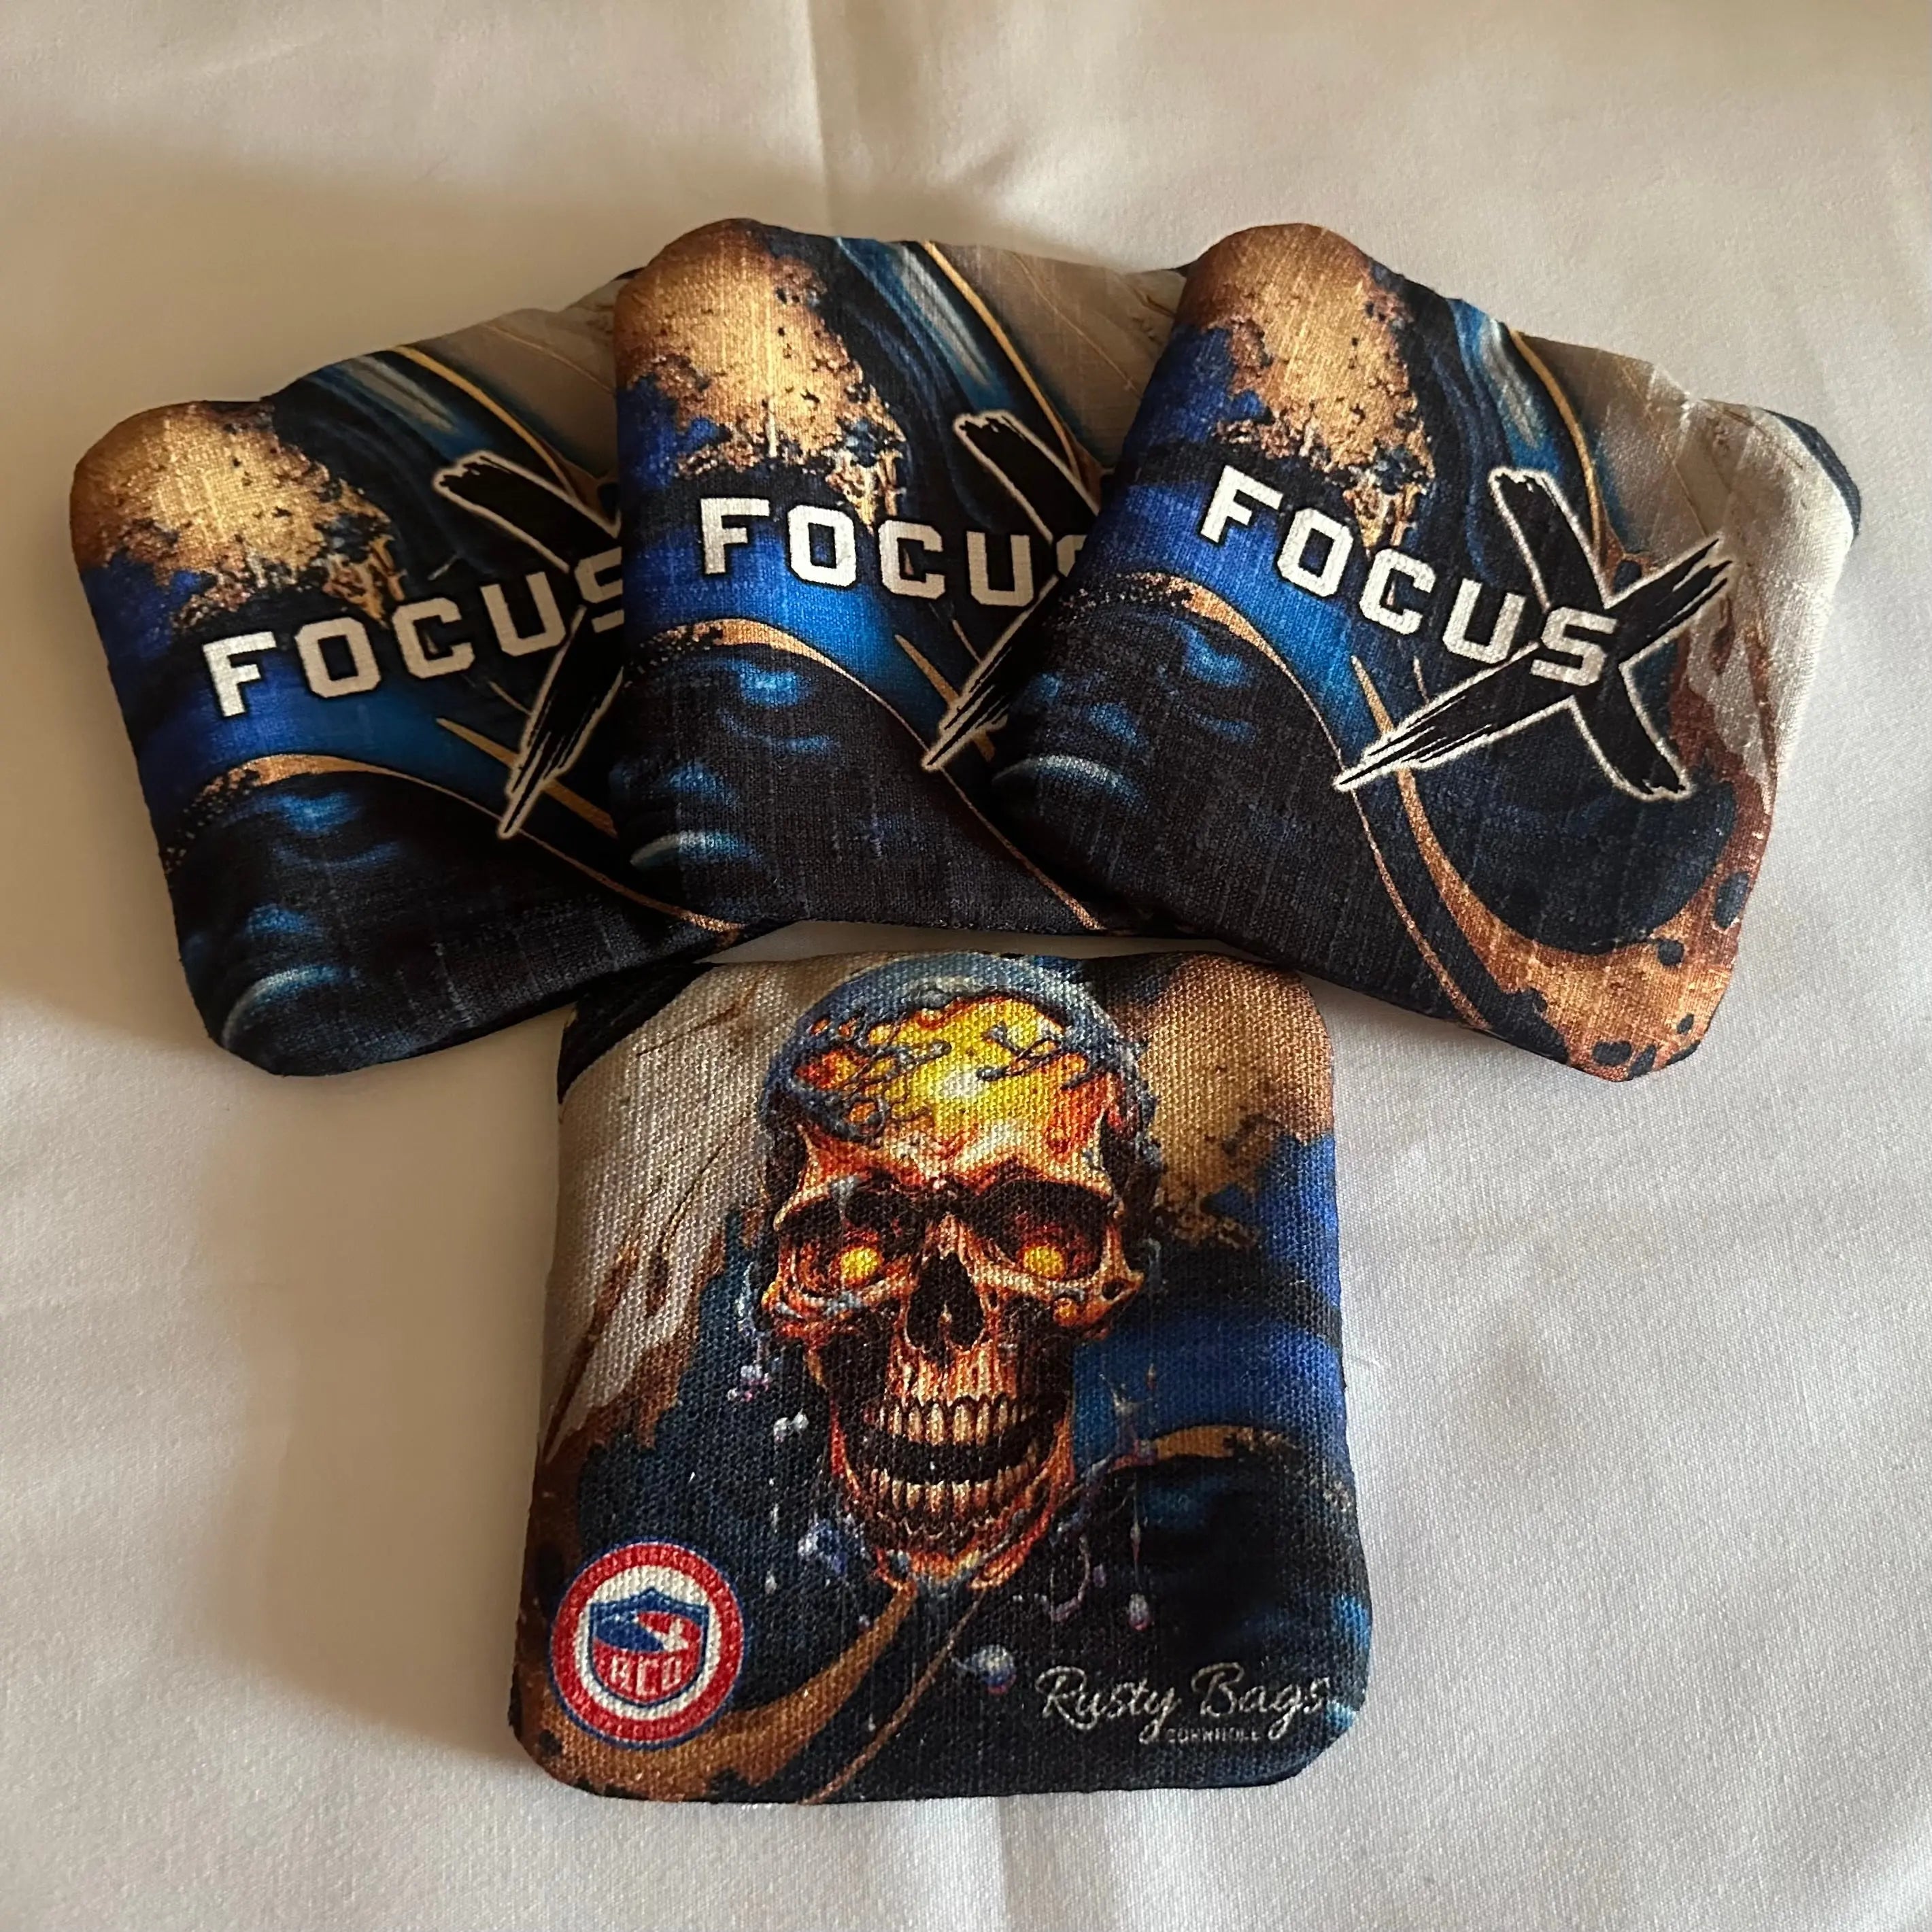 FOCUS X - ACO STAMPED - Pro Cornhole Bags 3 KT Cornhole Wraps and Boards